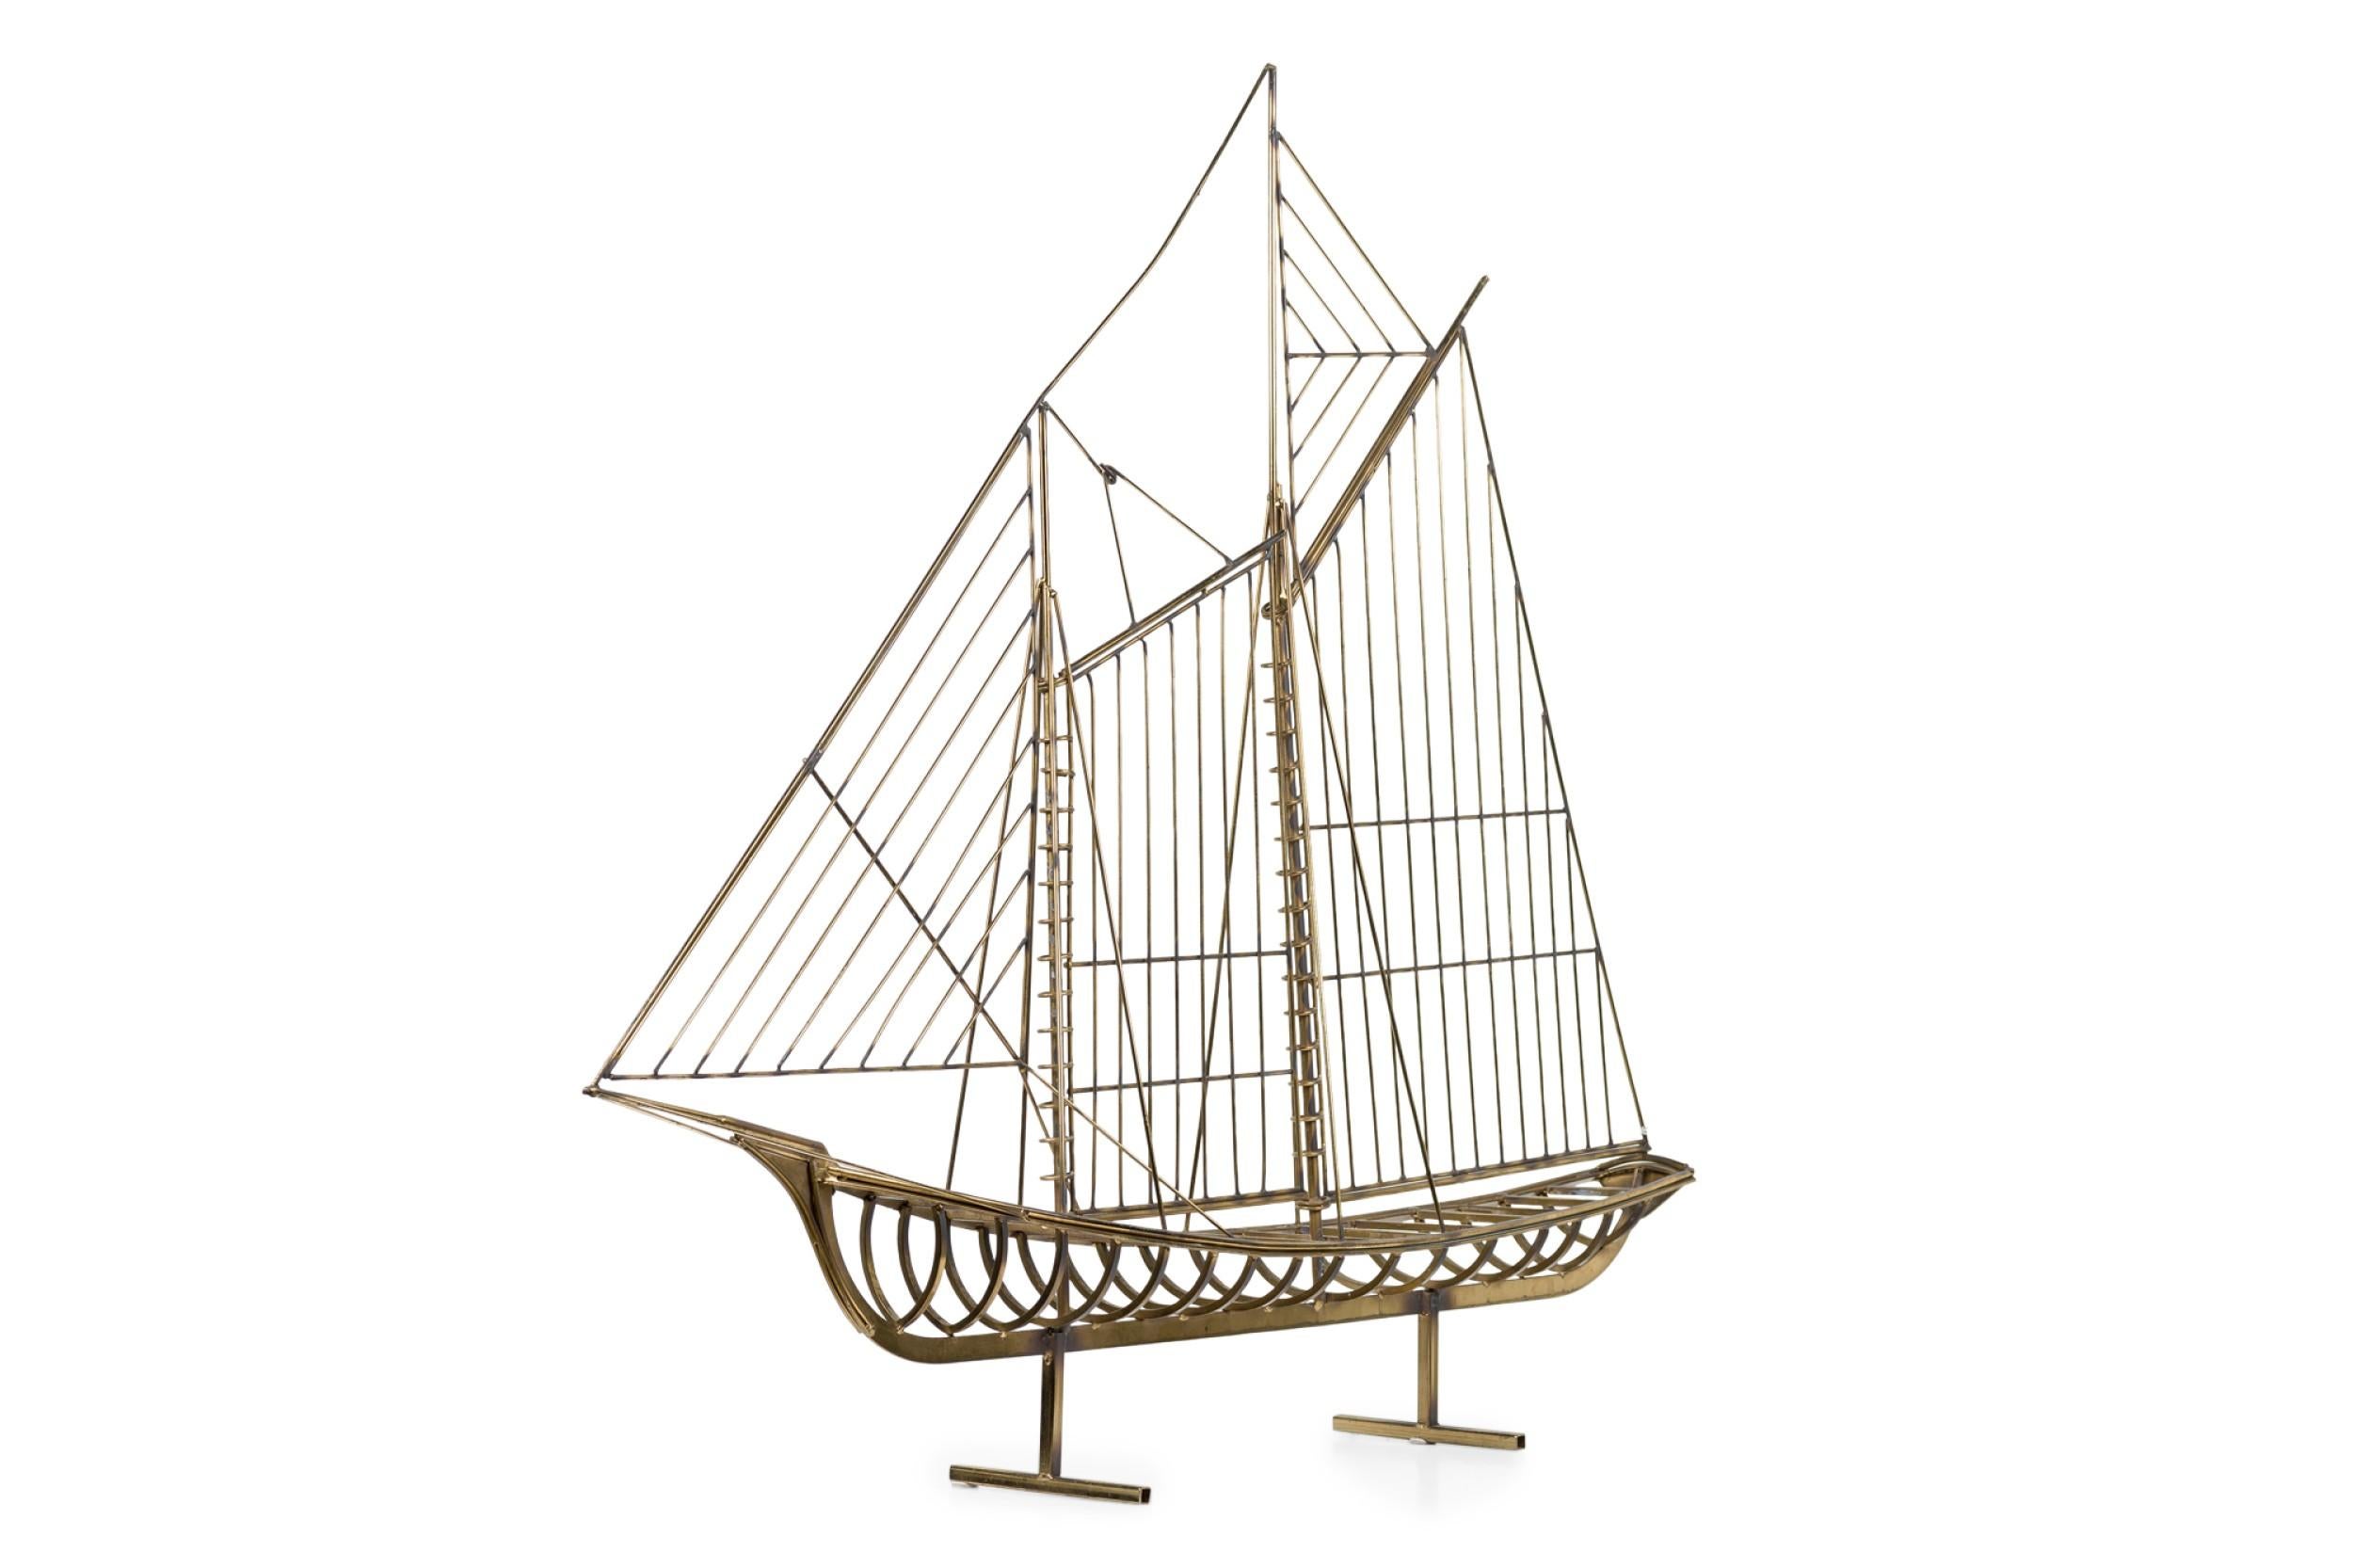 2 American Mid-Century sculptures of a brass model of a large sailboat standing on a 2 T post stands (by CURTIS JERE) (PRICED EACH)
